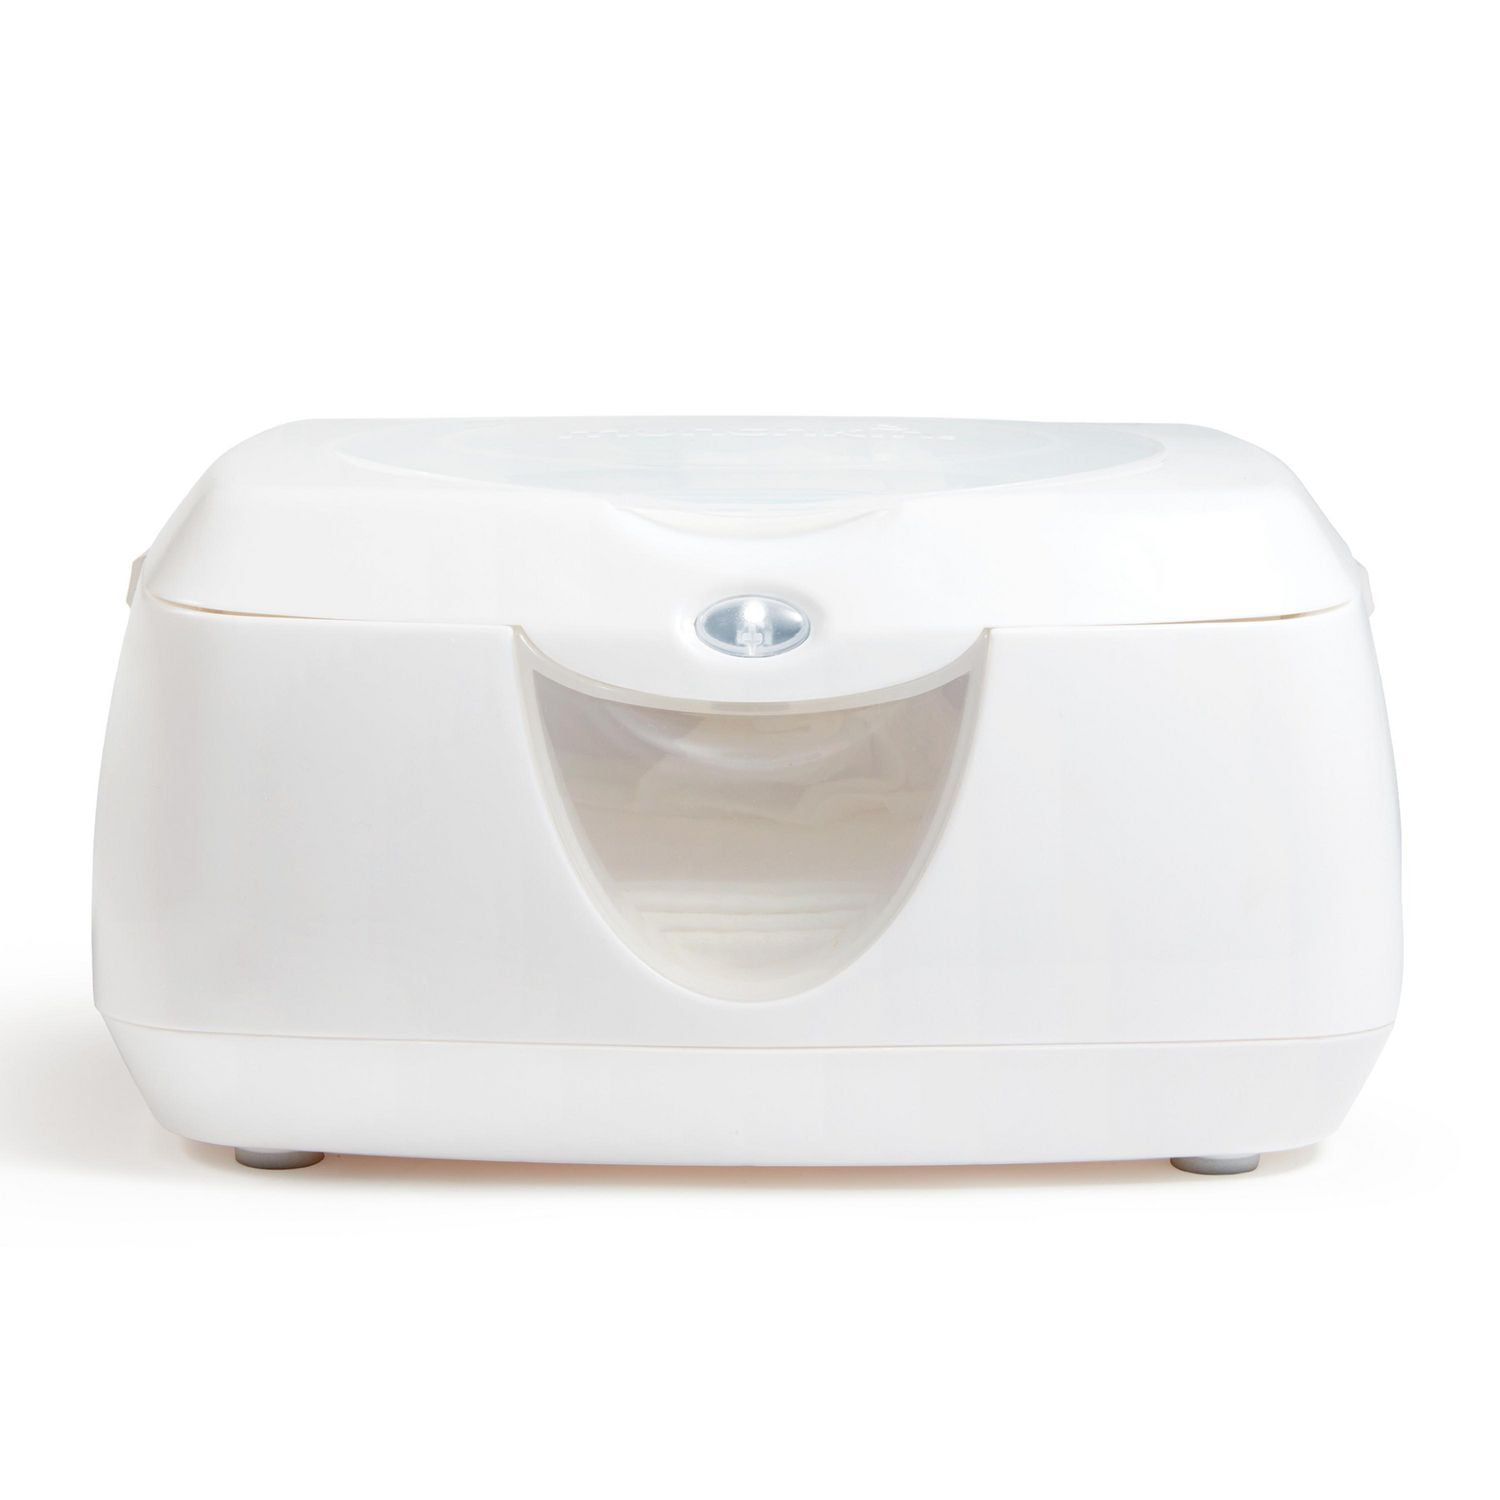 Wipe Warmer - Walmart.com  Baby ads, Diaper, Parents choice diapers